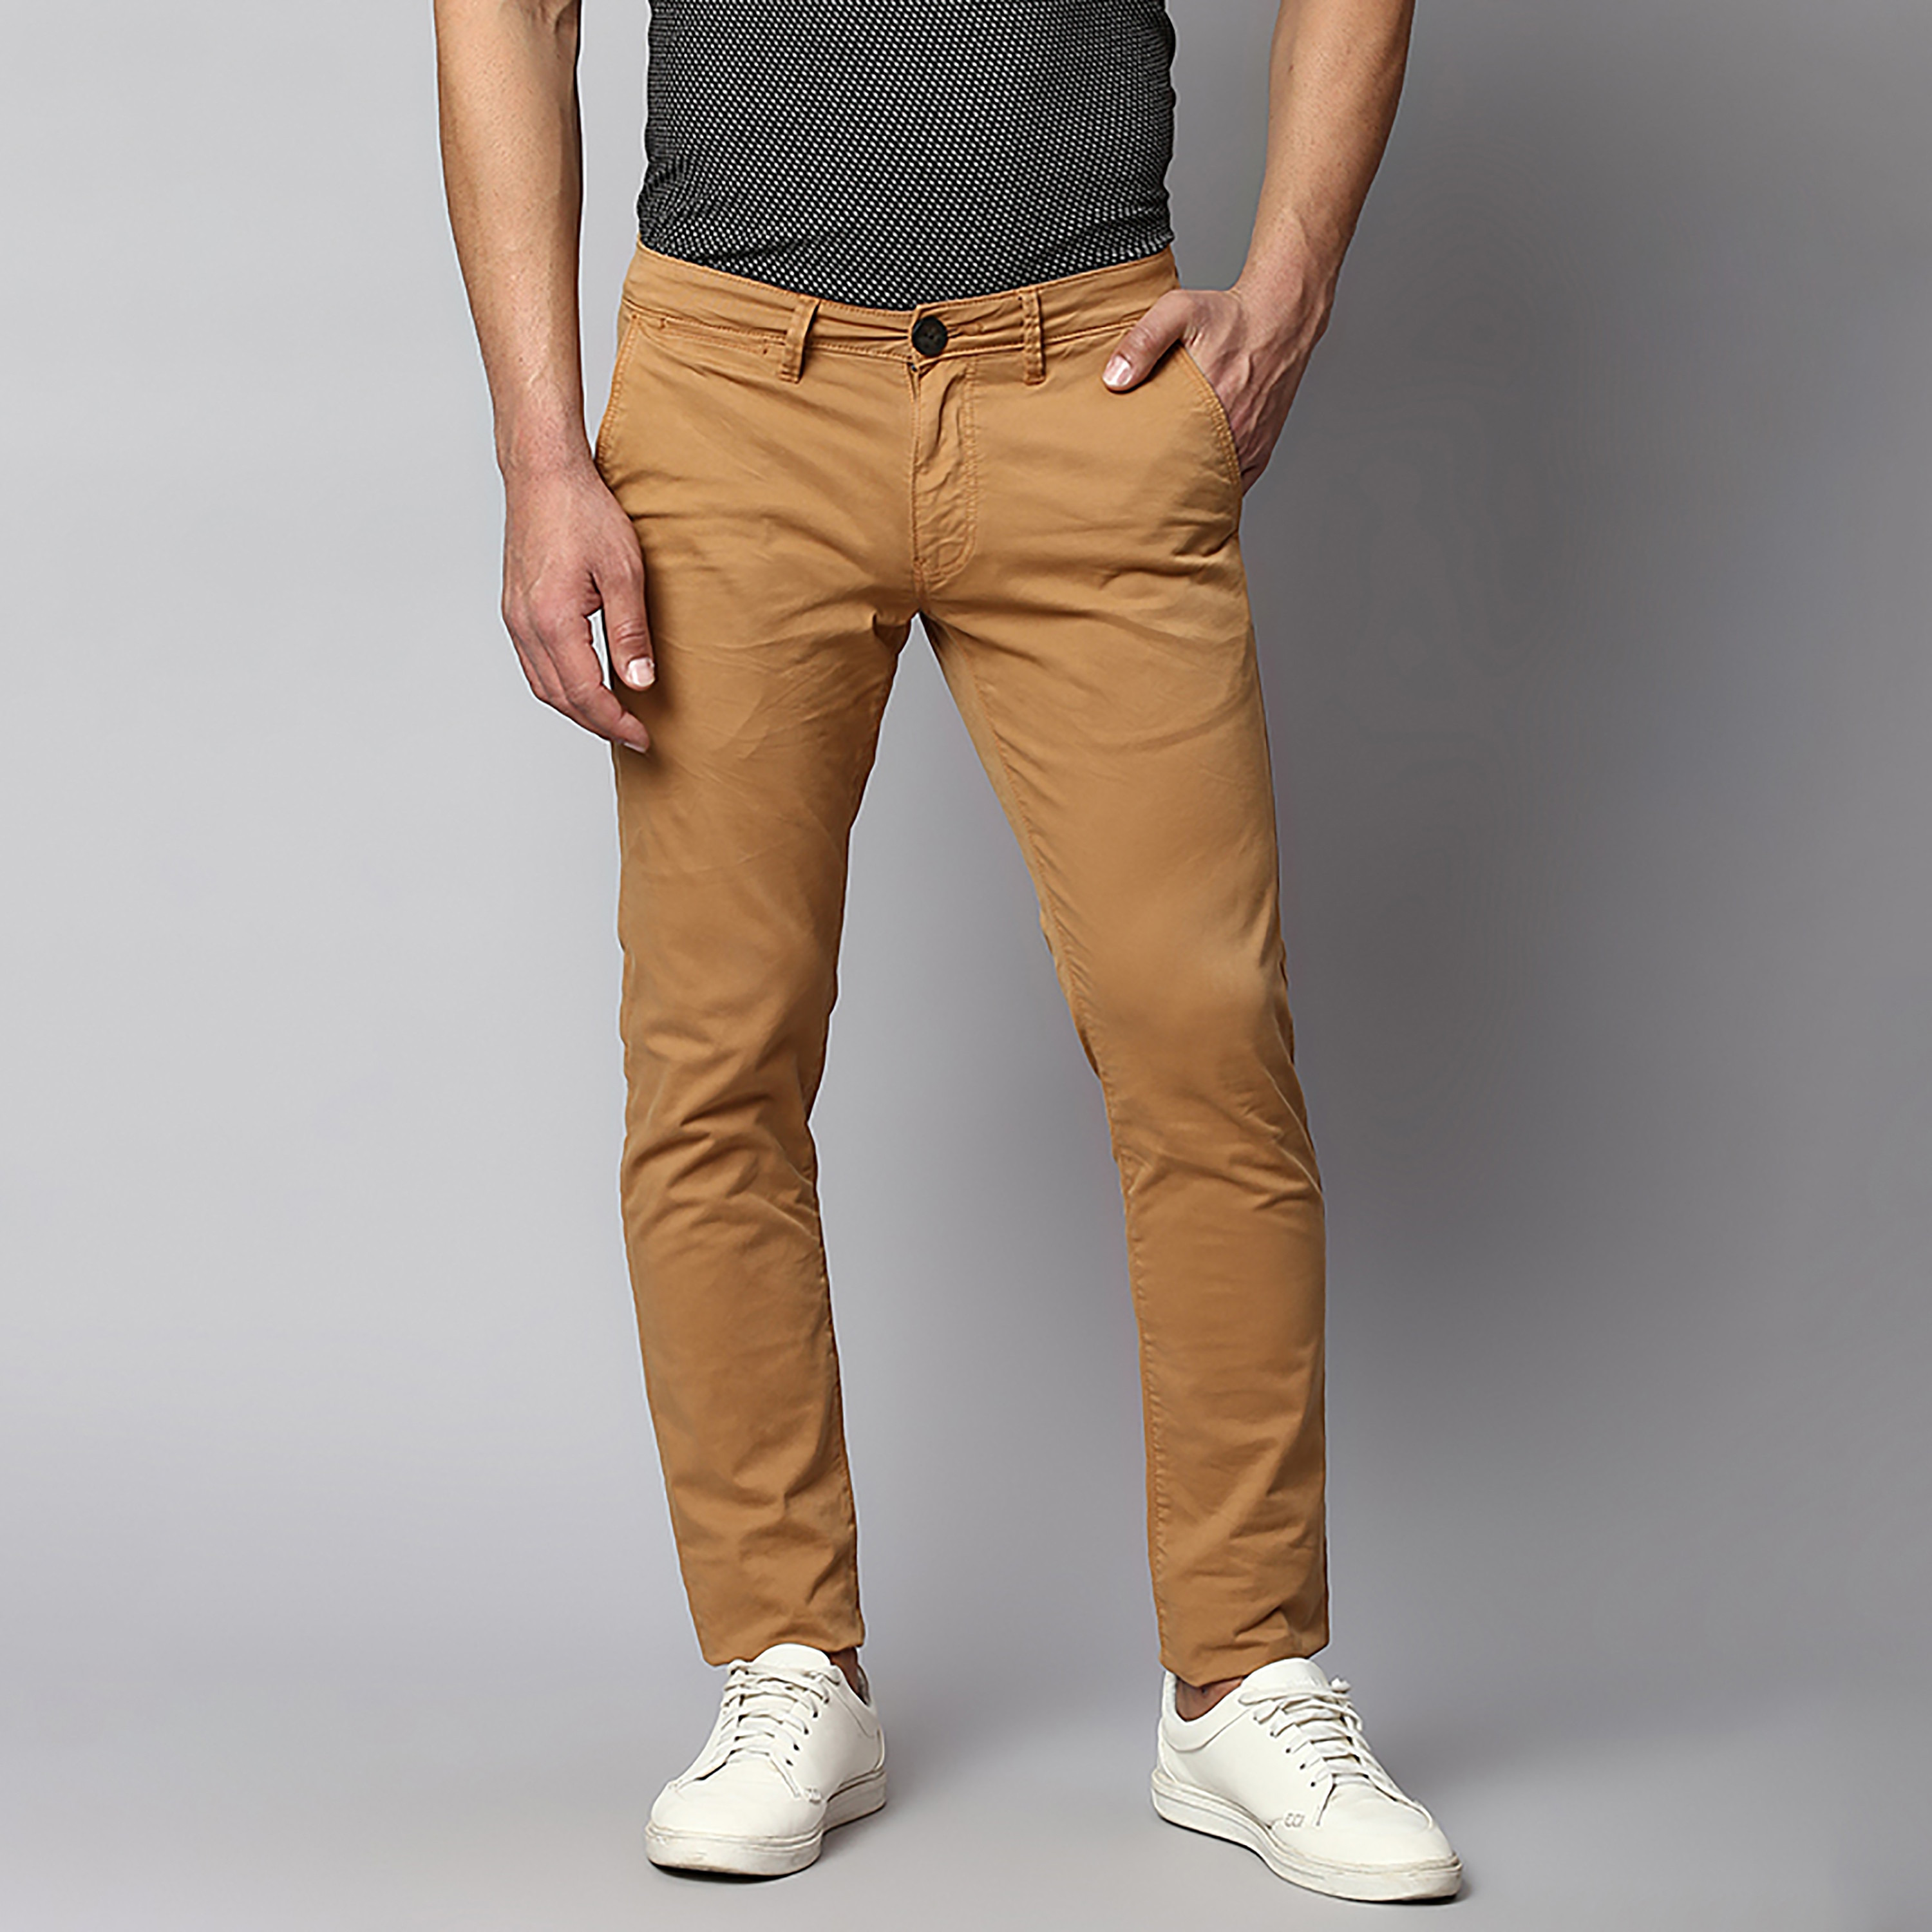 U.S. POLO ASSN. Slim Fit Men Multicolor Trousers - Buy U.S. POLO ASSN. Slim  Fit Men Multicolor Trousers Online at Best Prices in India | Flipkart.com